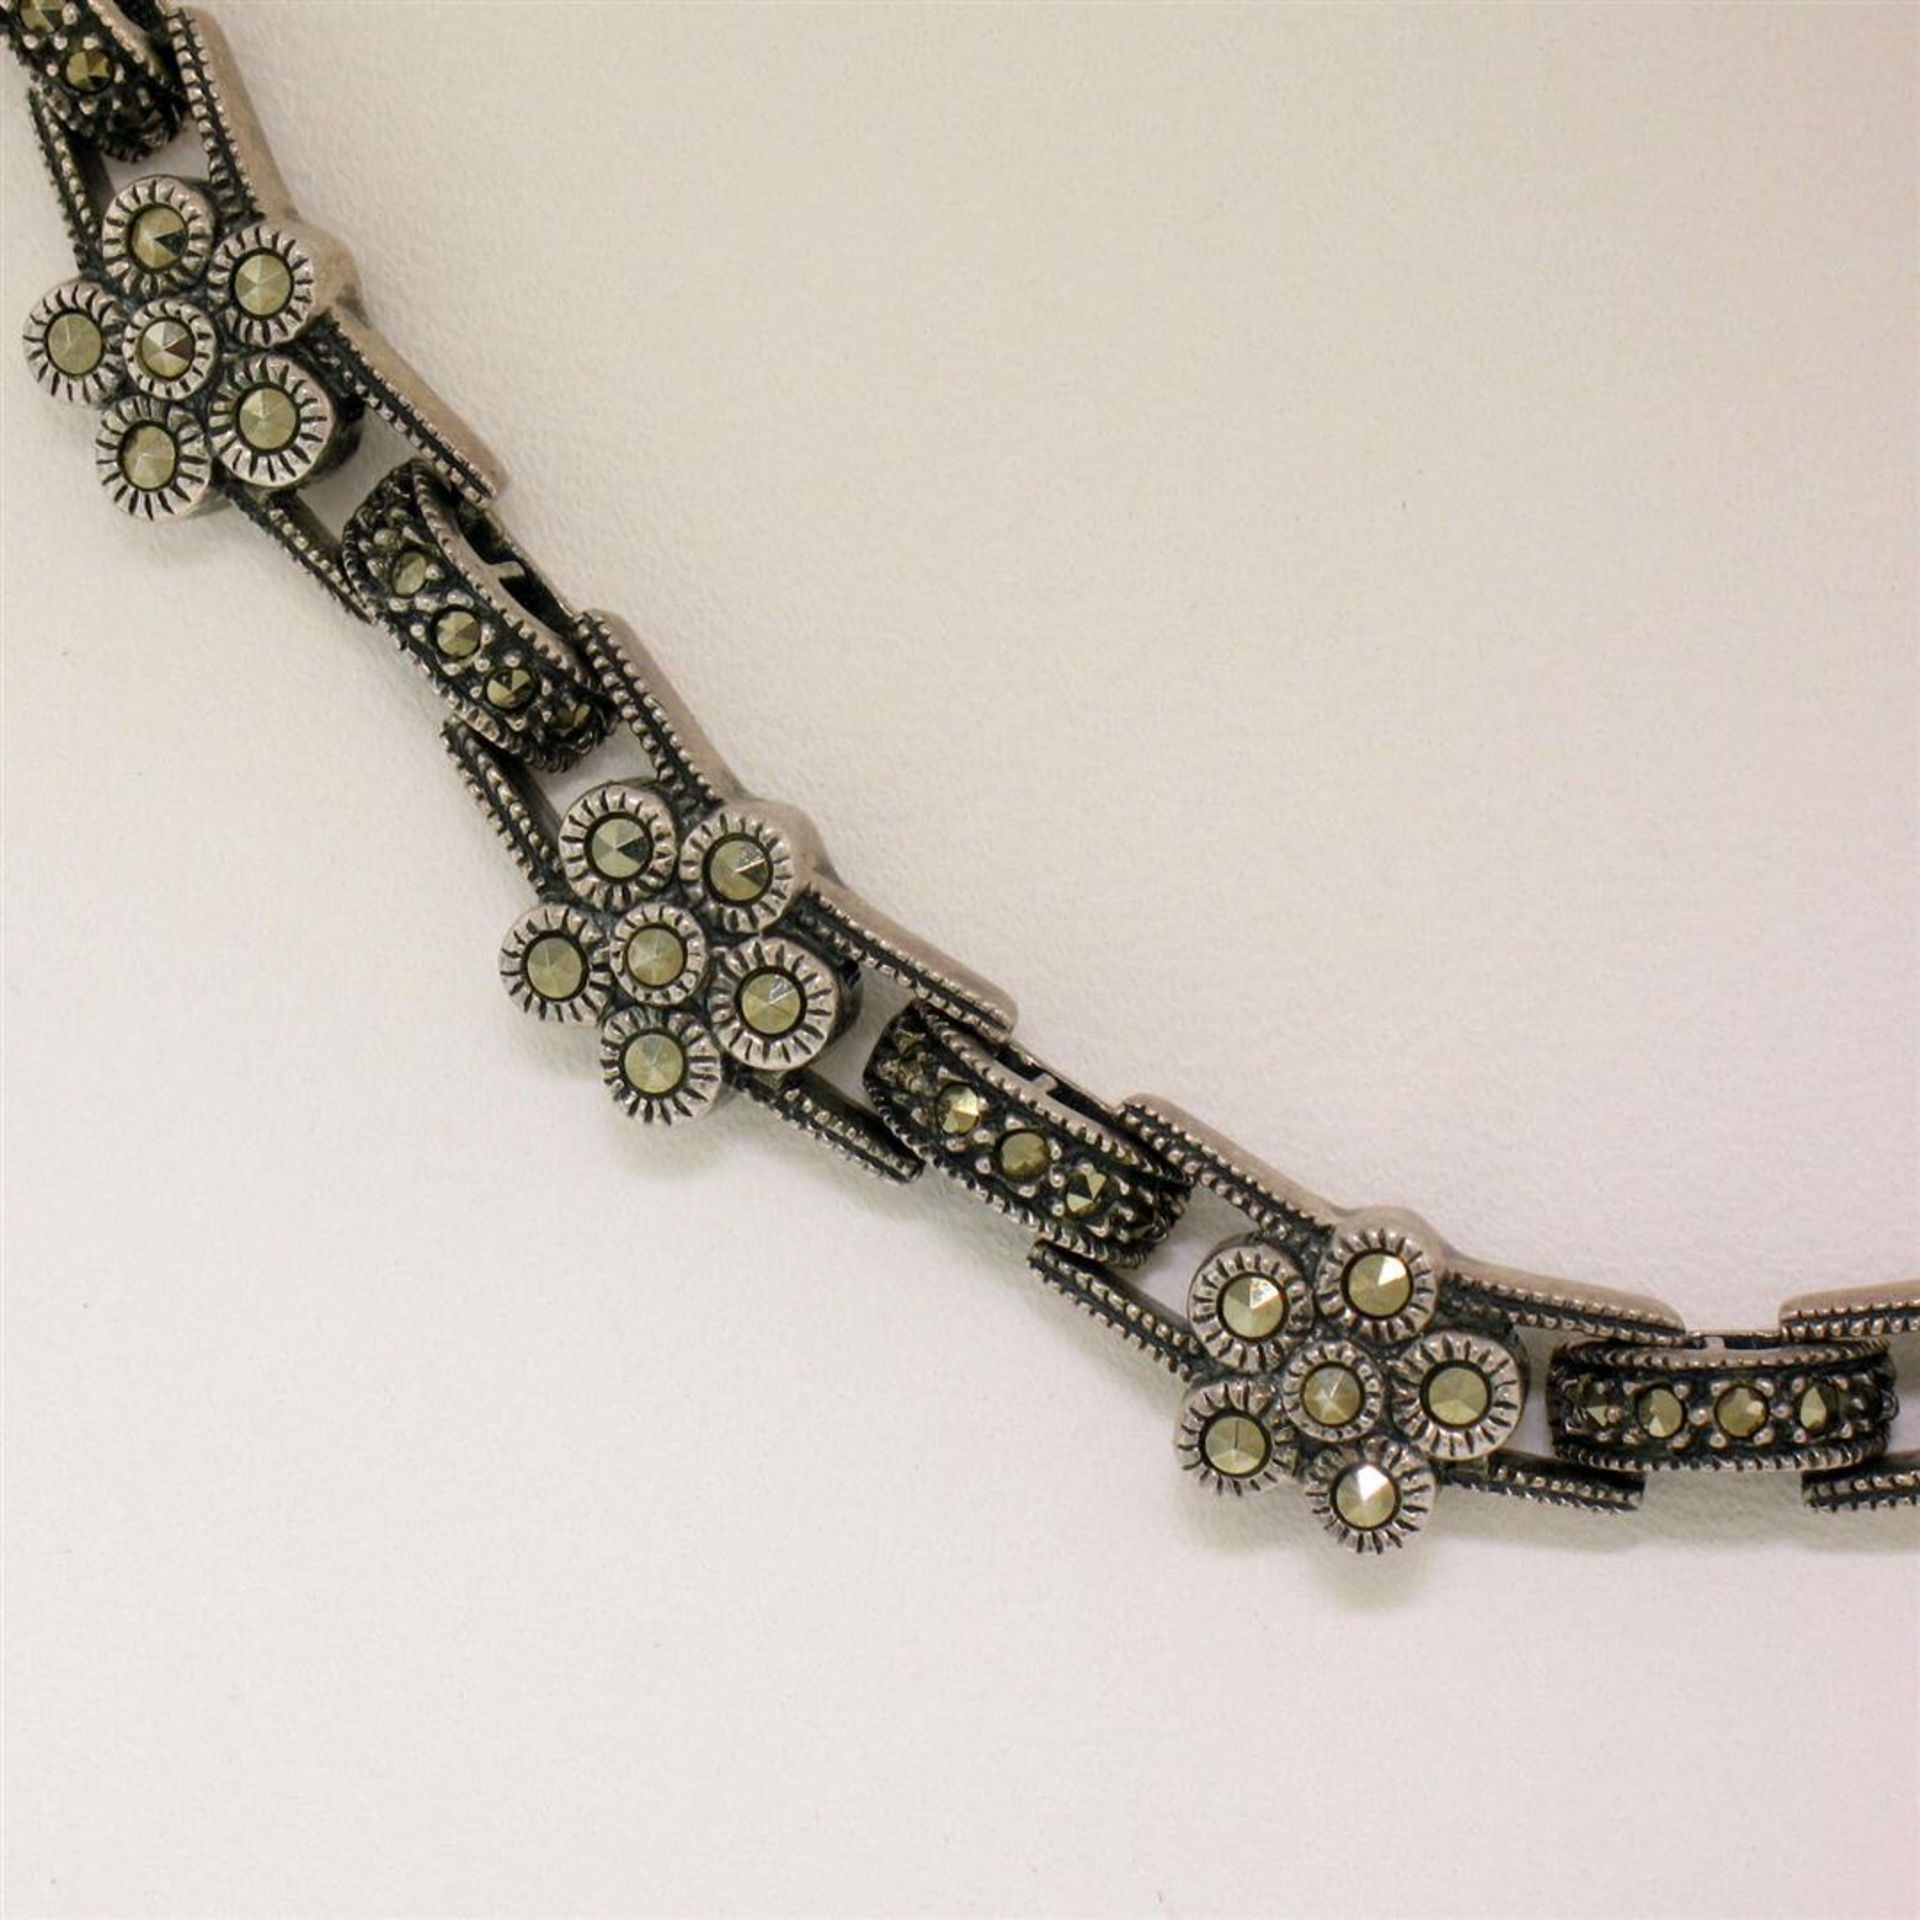 Judith Jack 16" Sterling Silver Marcasite Flower Cluster Chain Necklace w/ Box - Image 2 of 8